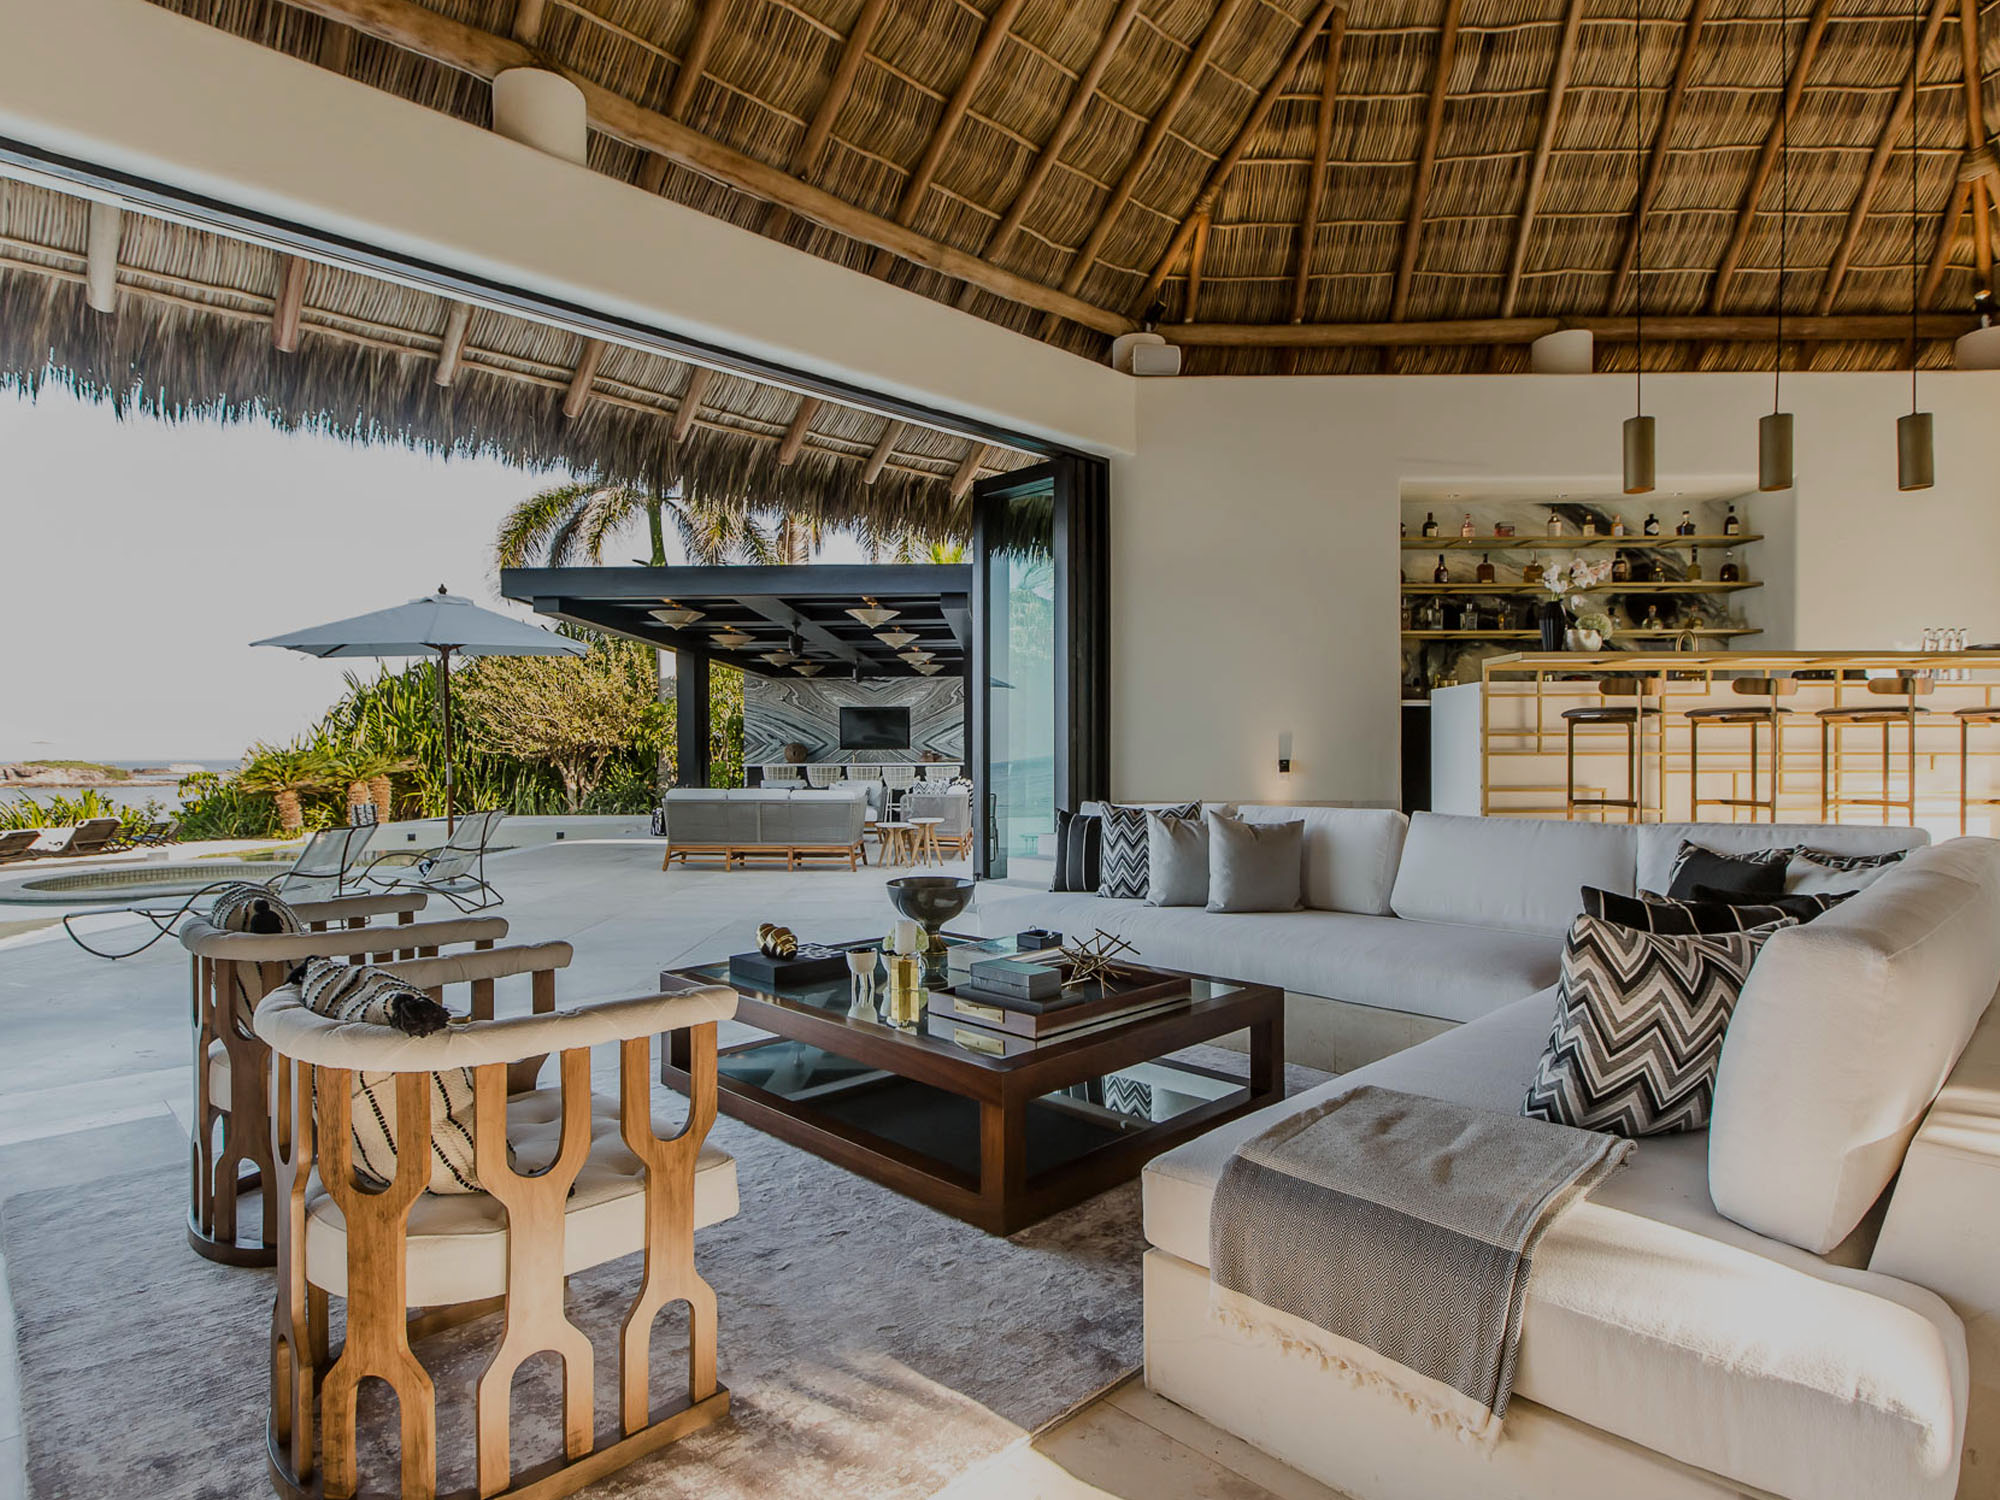 Casa Fortuna<strong>Located on the tip of the punta Mita peninsula, this newly remodeled ultra-luxury beachfront estate possesses unparalleled views of the setting sun over the Pacific Ocean.</strong>